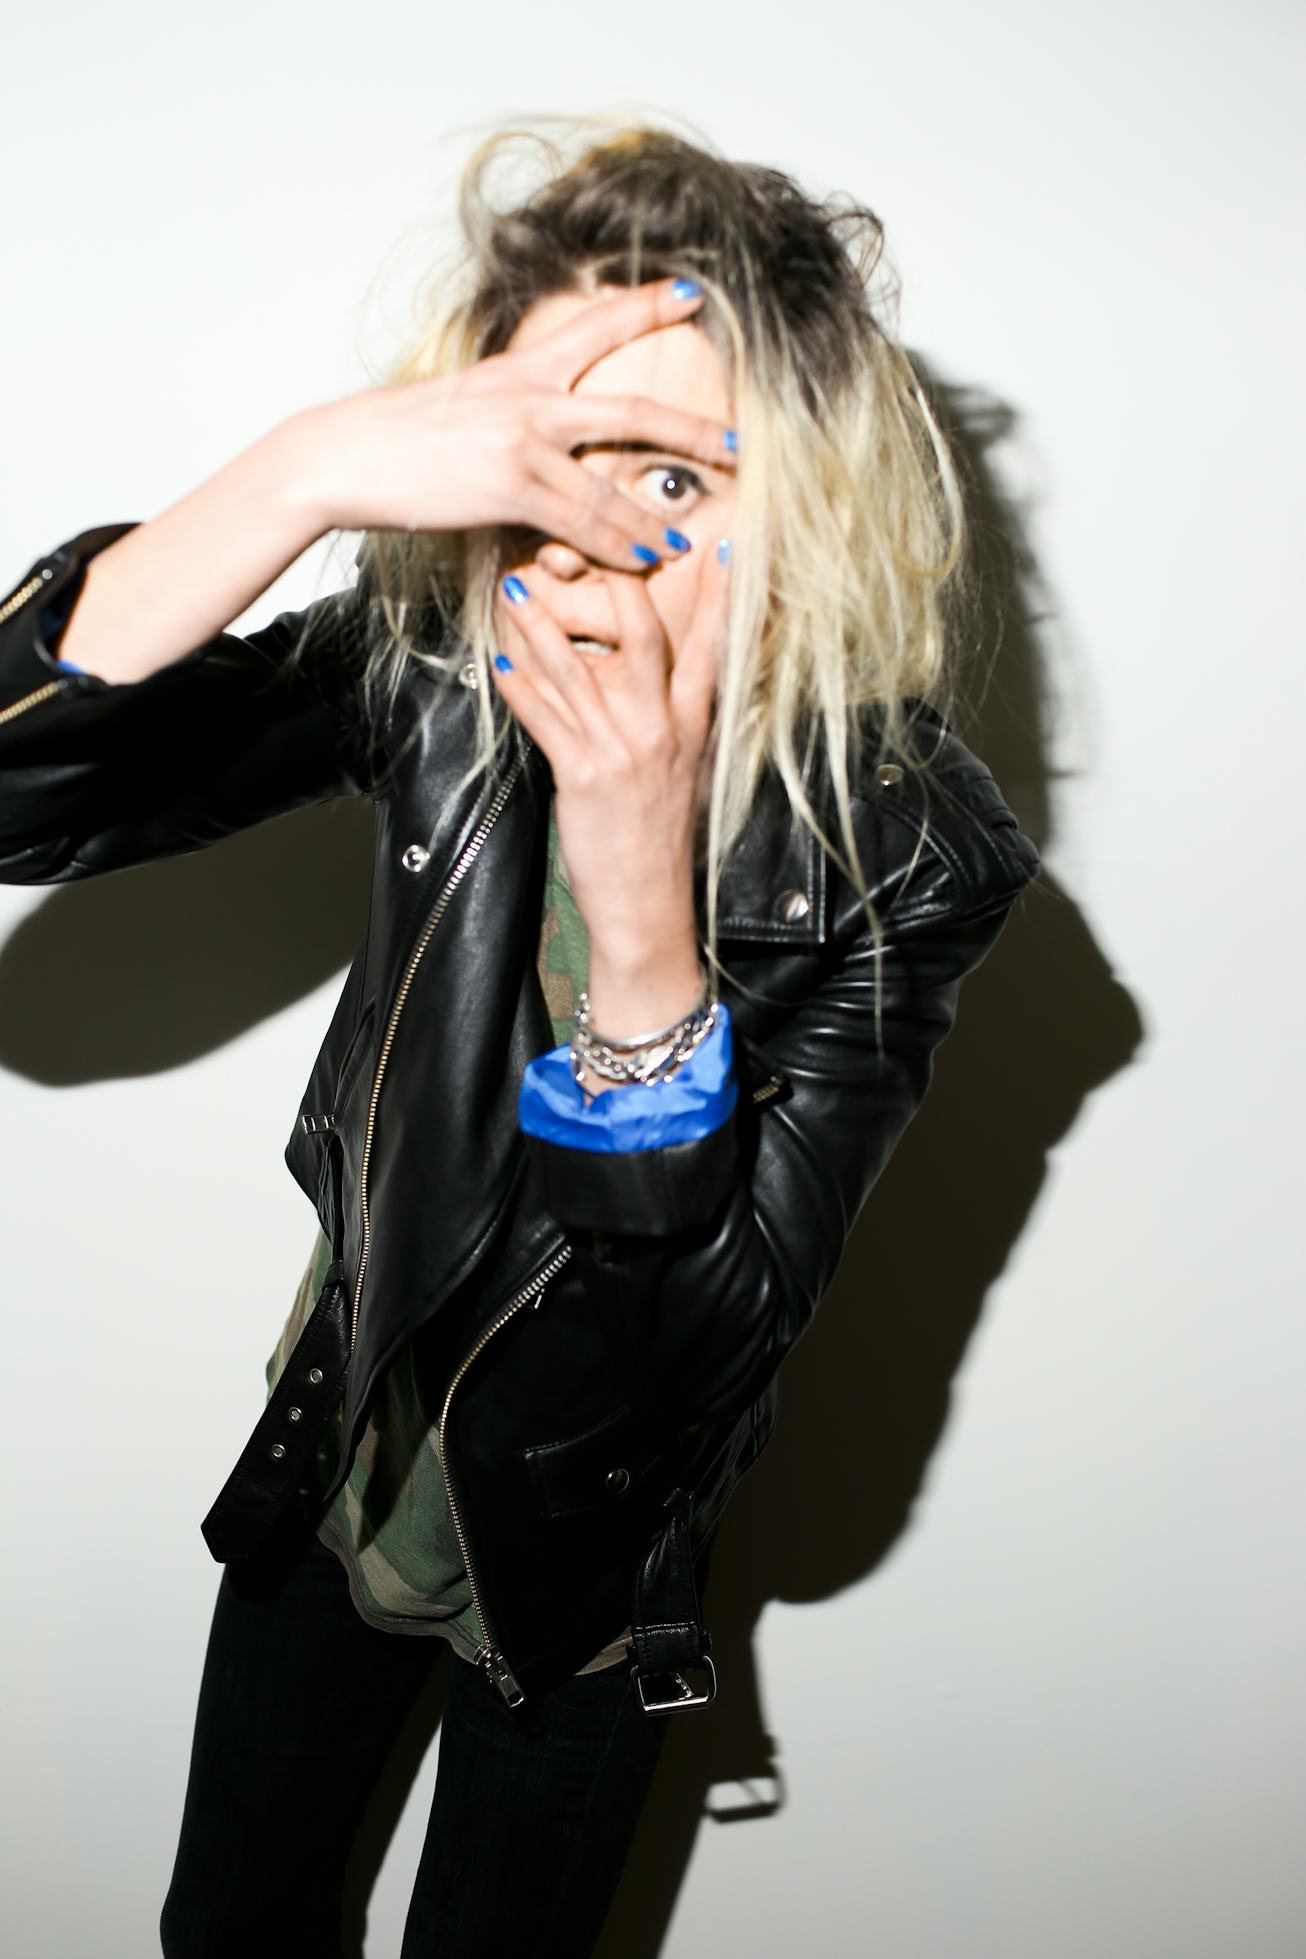 Alison Mosshart peers into the camera, her hand covering everything but her eye.